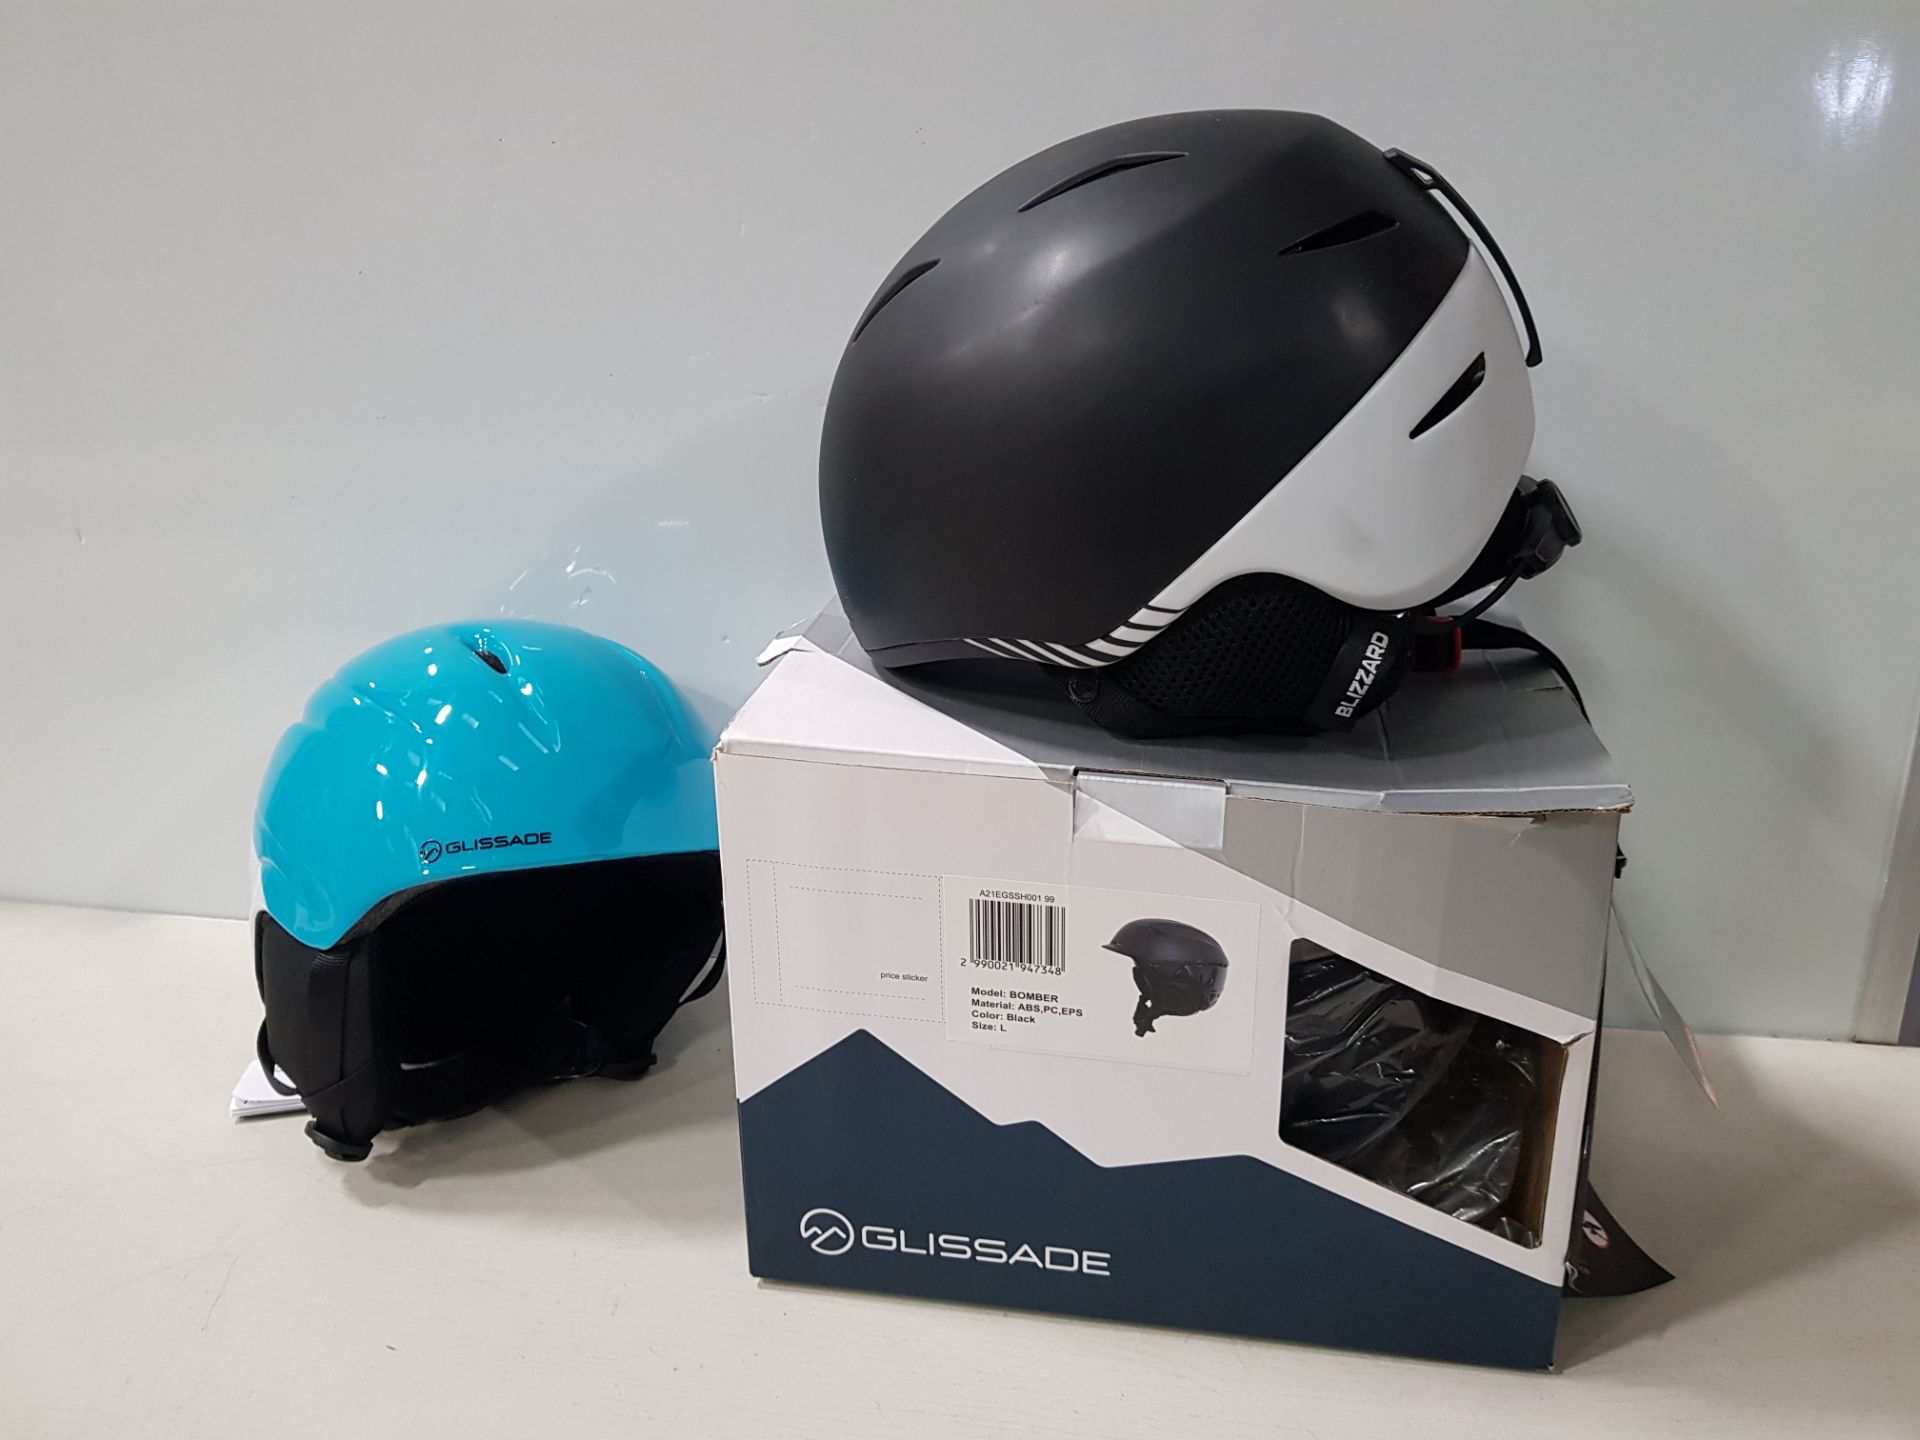 20 X BRAND NEW MIXED HELMET LOT TO INCLUDE SOLOMON - ROLLER BLADE - BLIZZARD AND UVEX HELMETS IN